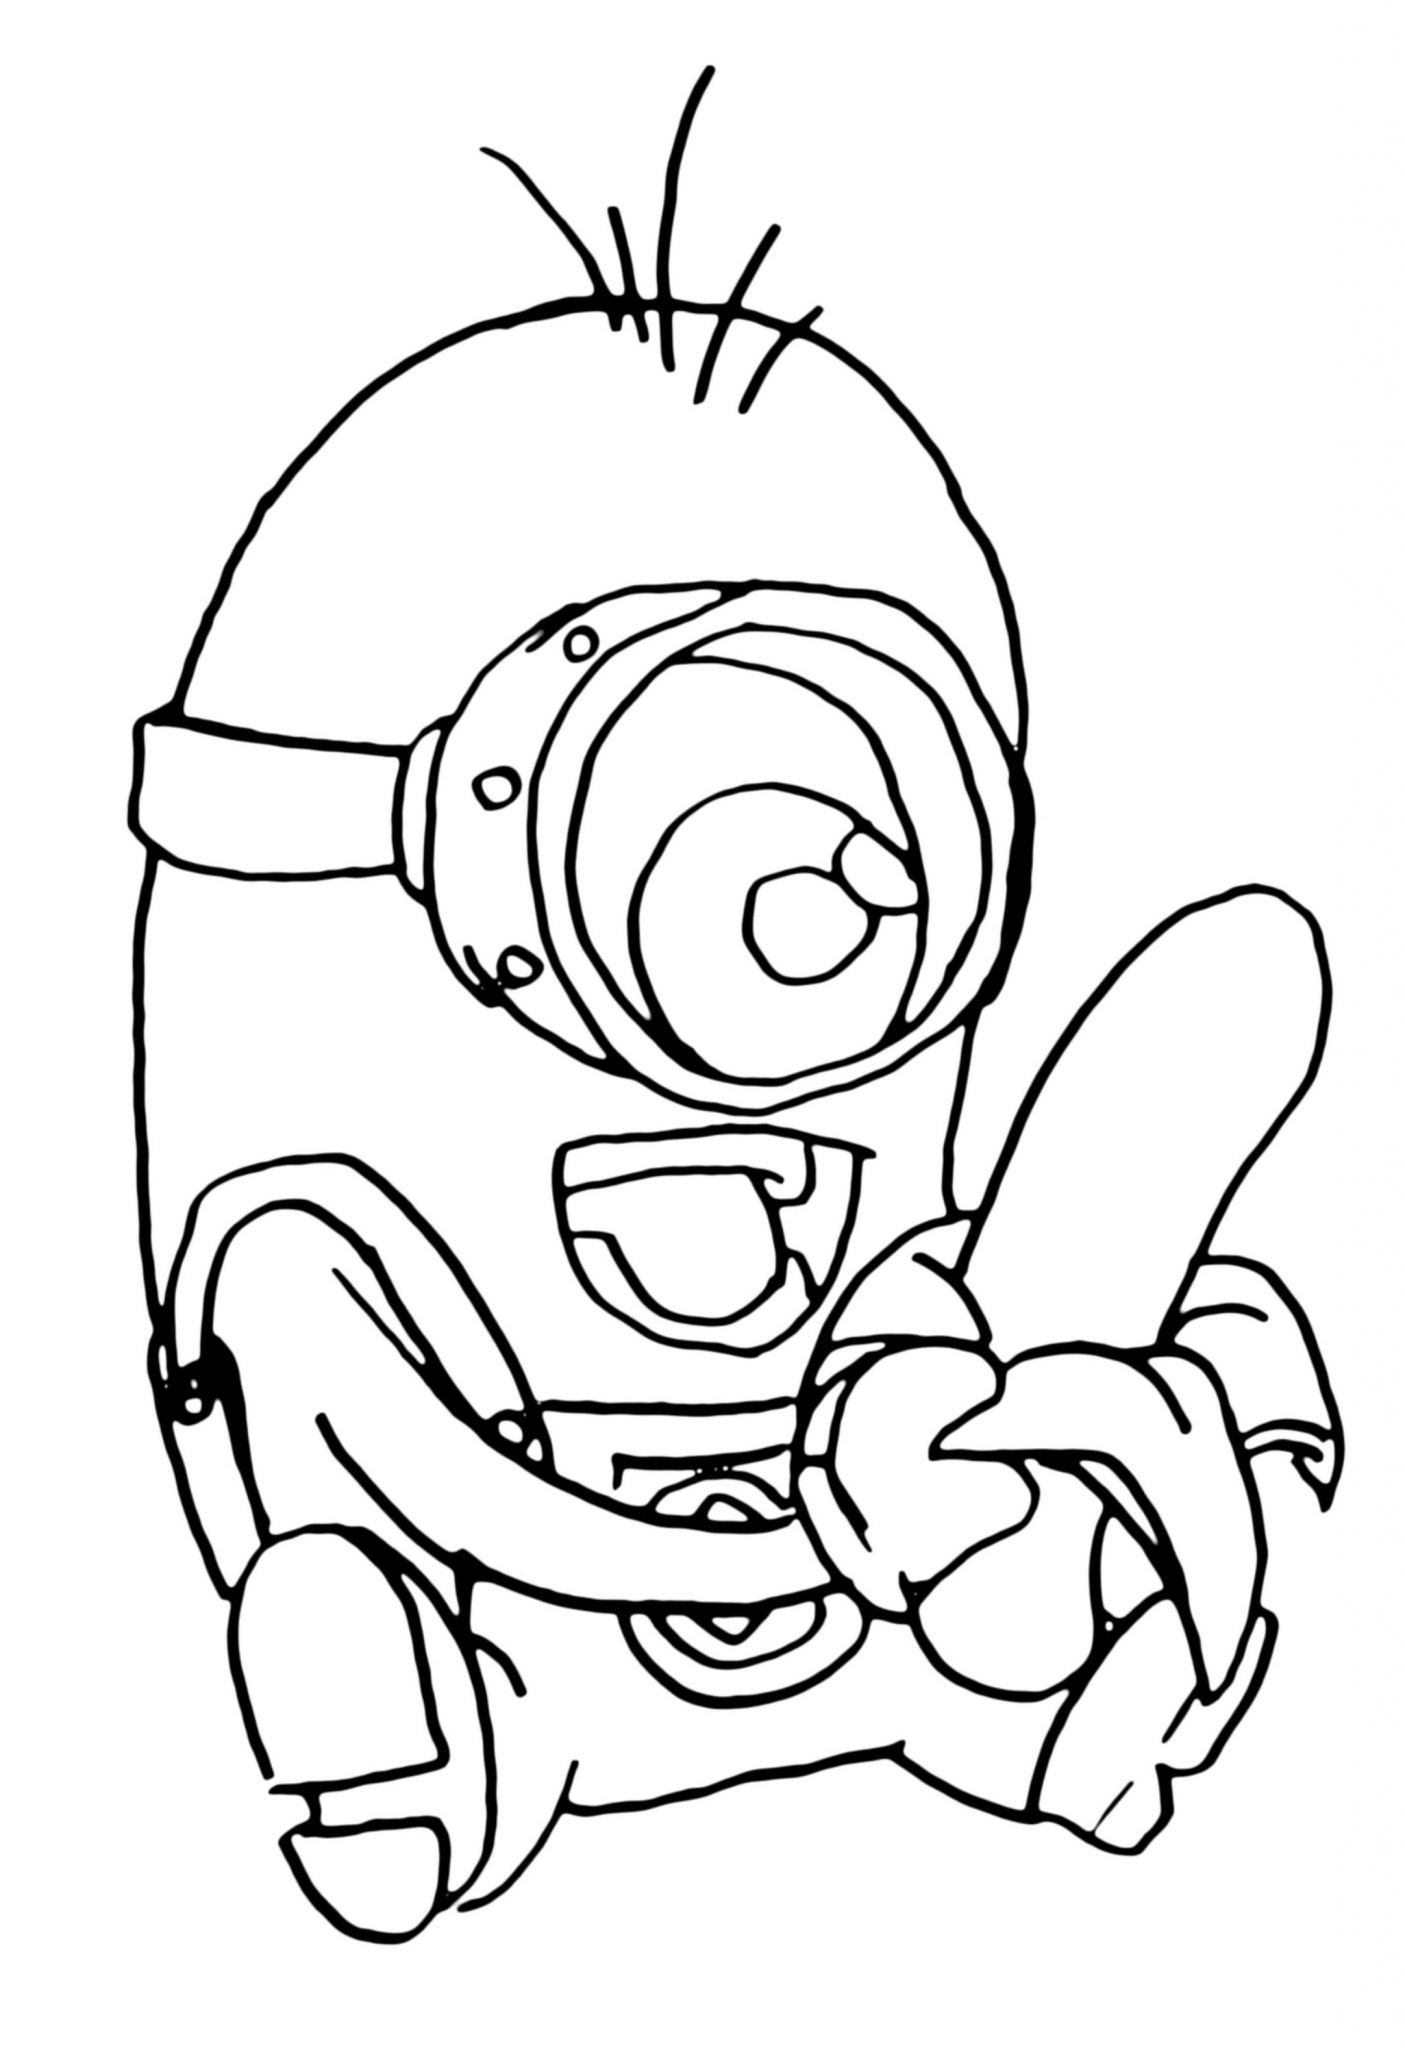 Print Download Minion Coloring Pages For Kids To Have Fun